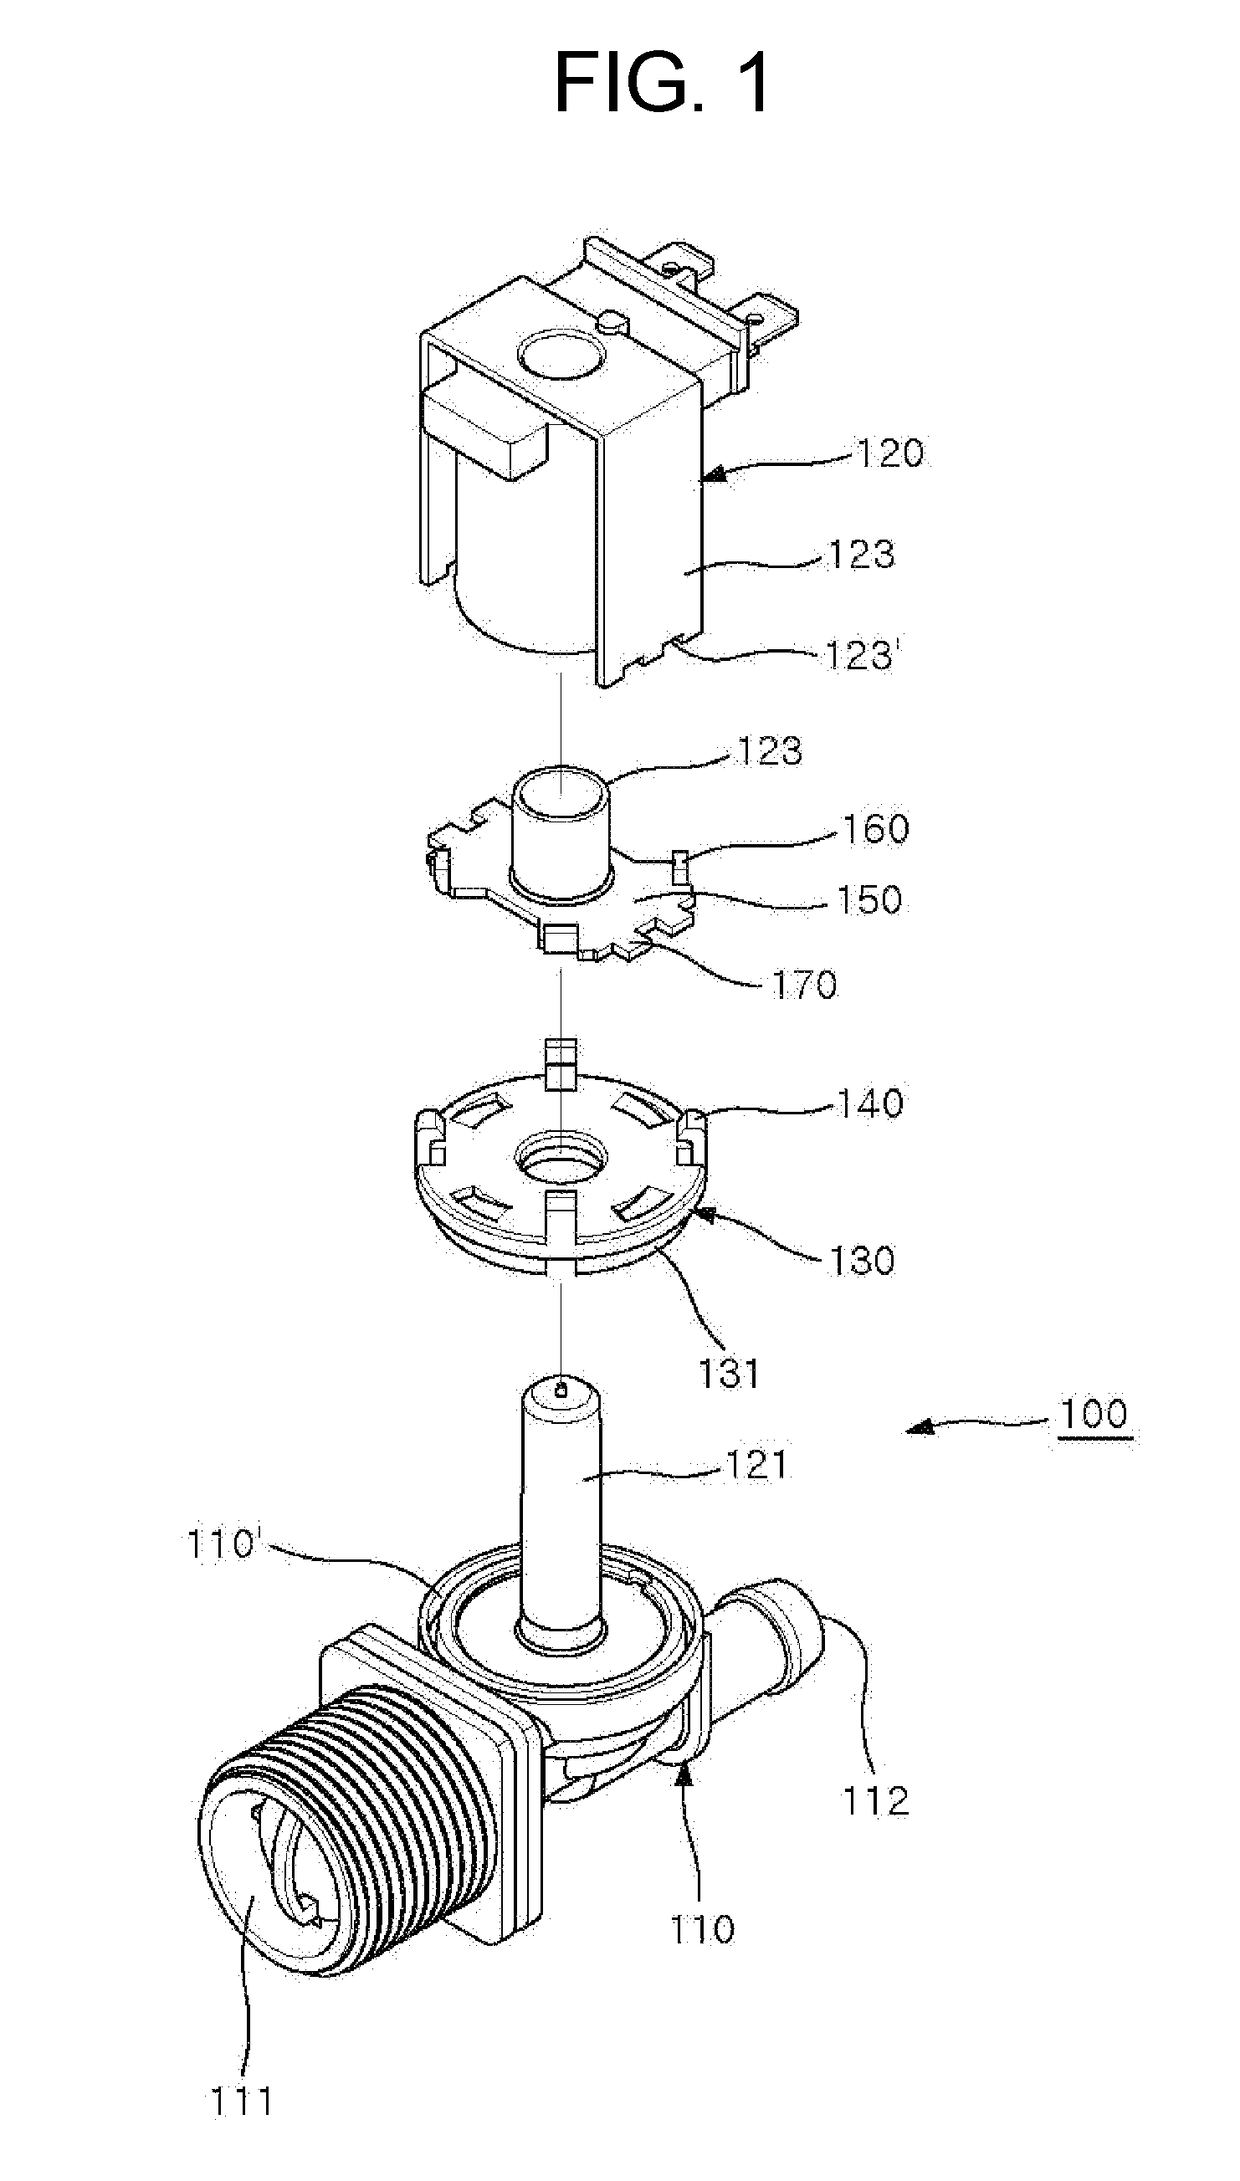 Coupling structure of electromagnetic valve for controlling water supply